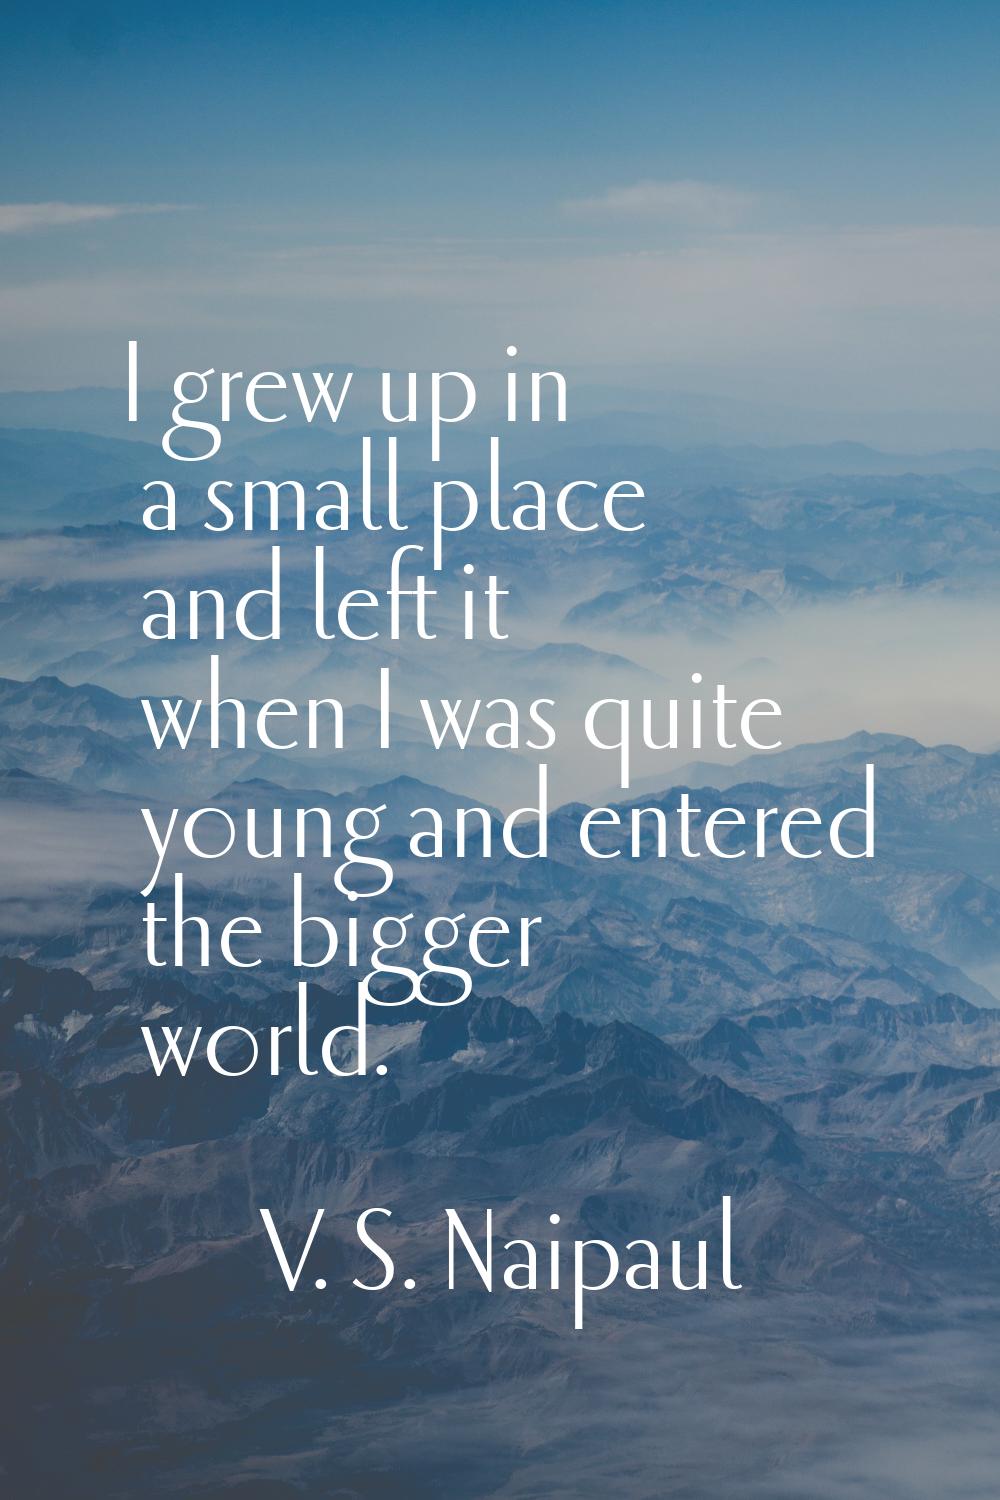 I grew up in a small place and left it when I was quite young and entered the bigger world.